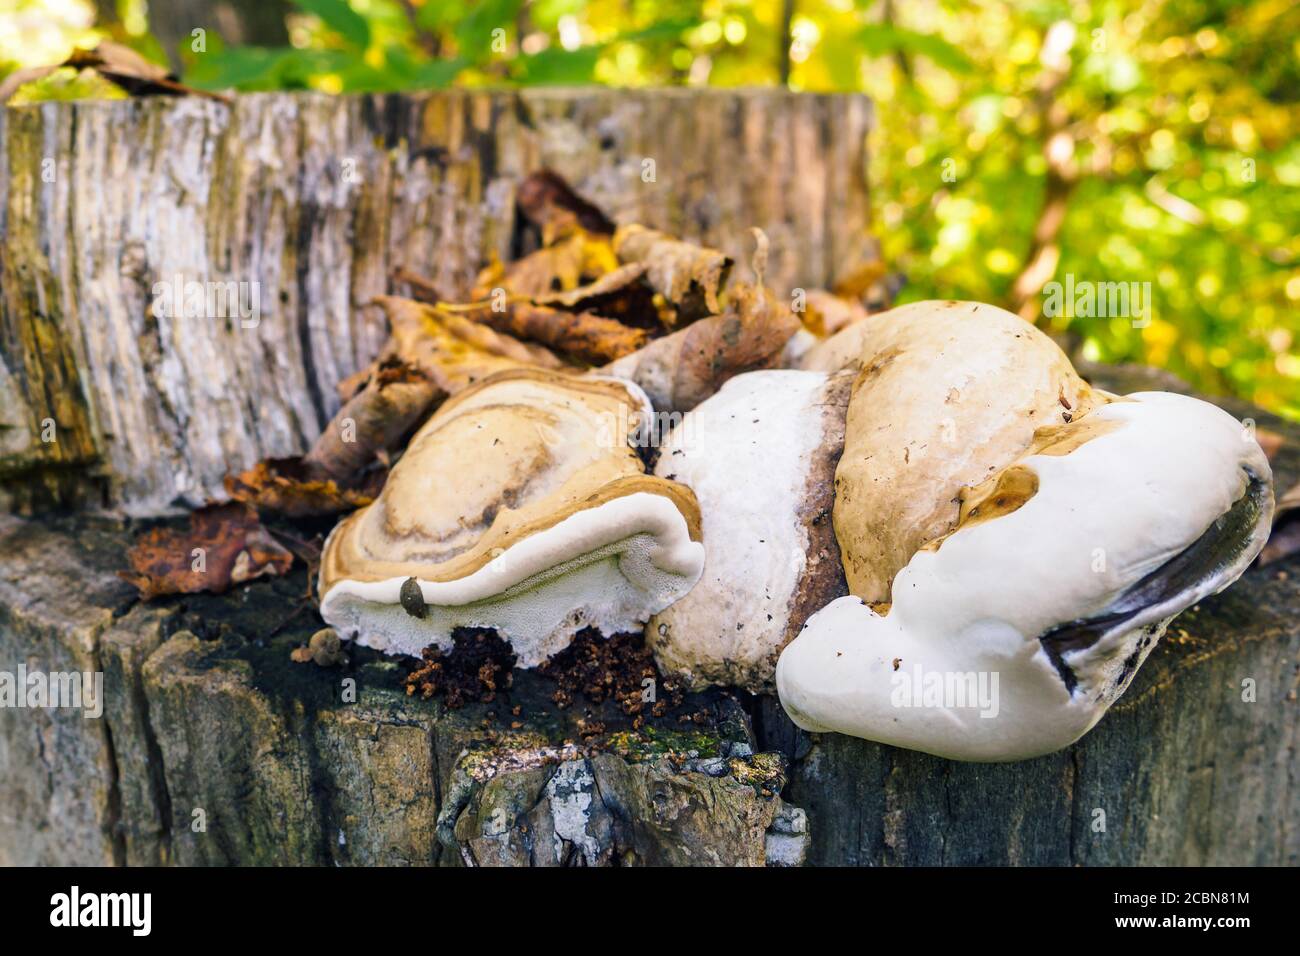 Tinder false fungus grows on a stump in the forest on an autumn sunny day. Stock Photo